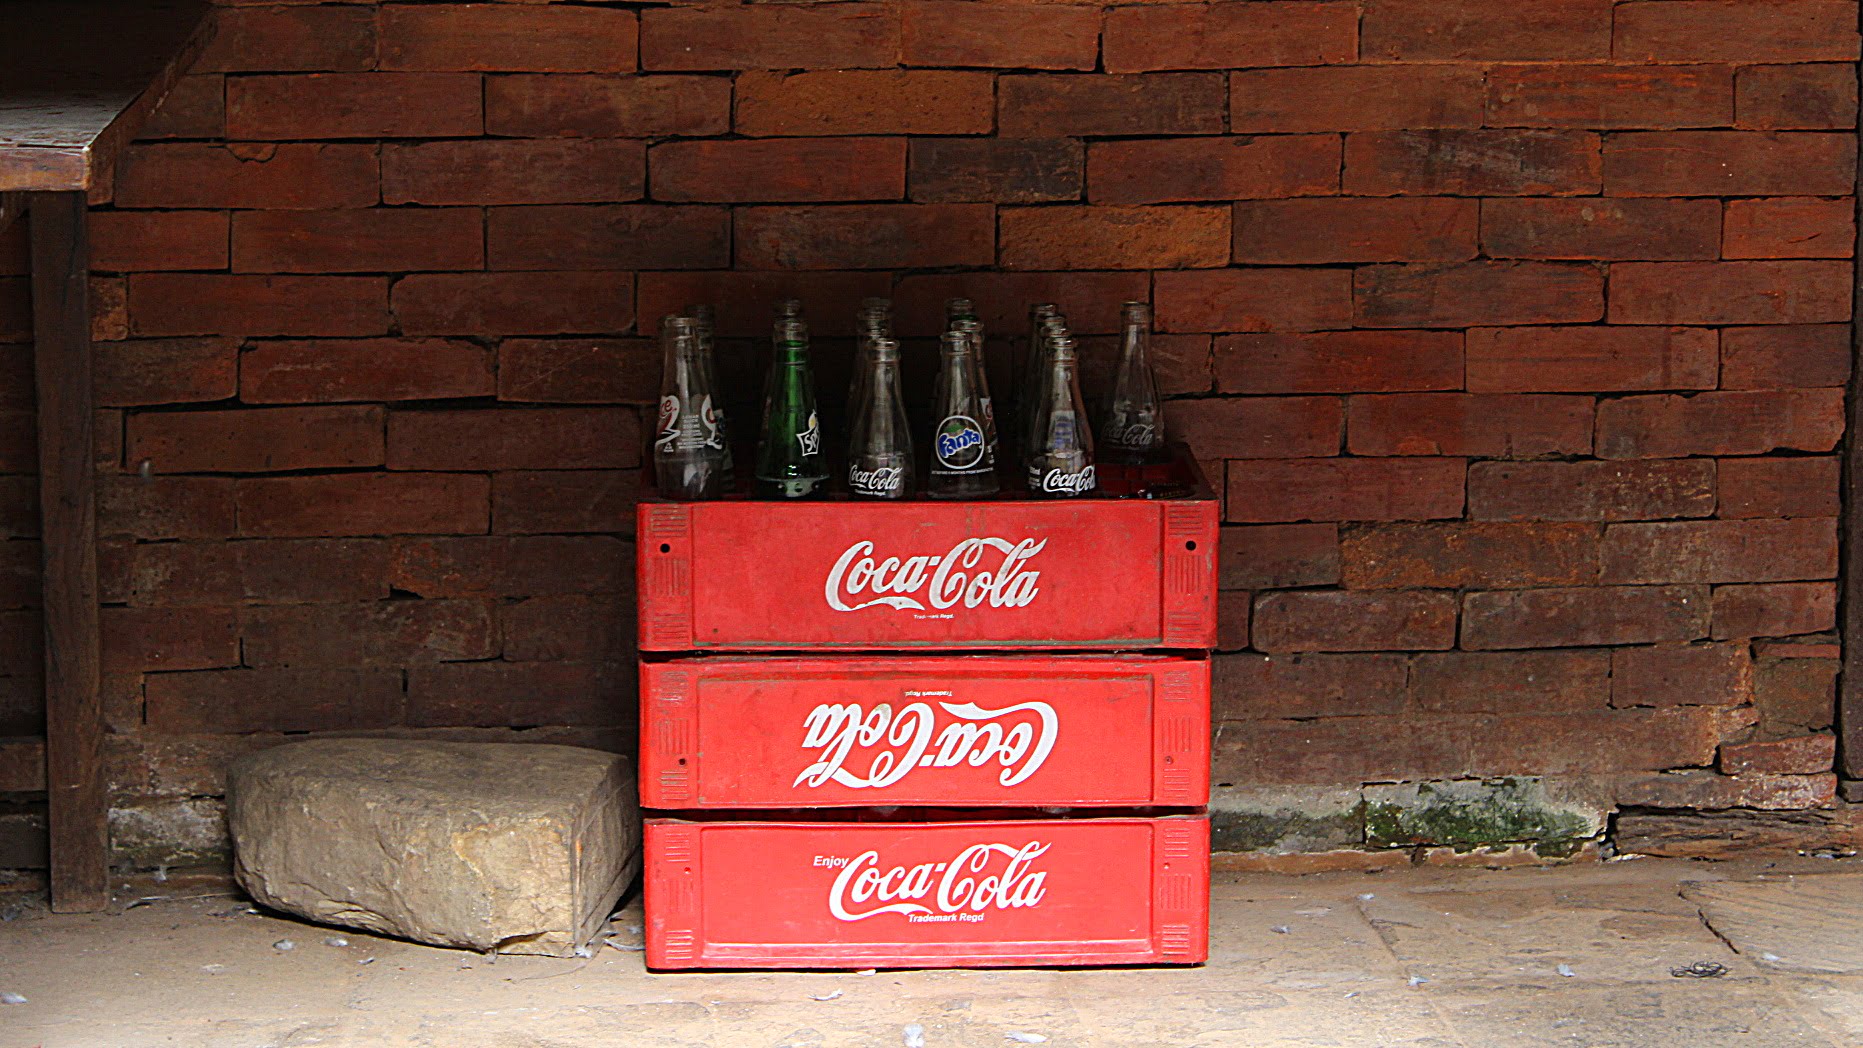 Coca-Cola containers and empty glass bottles in Durbar Square of Kathmandu by a brick wall.